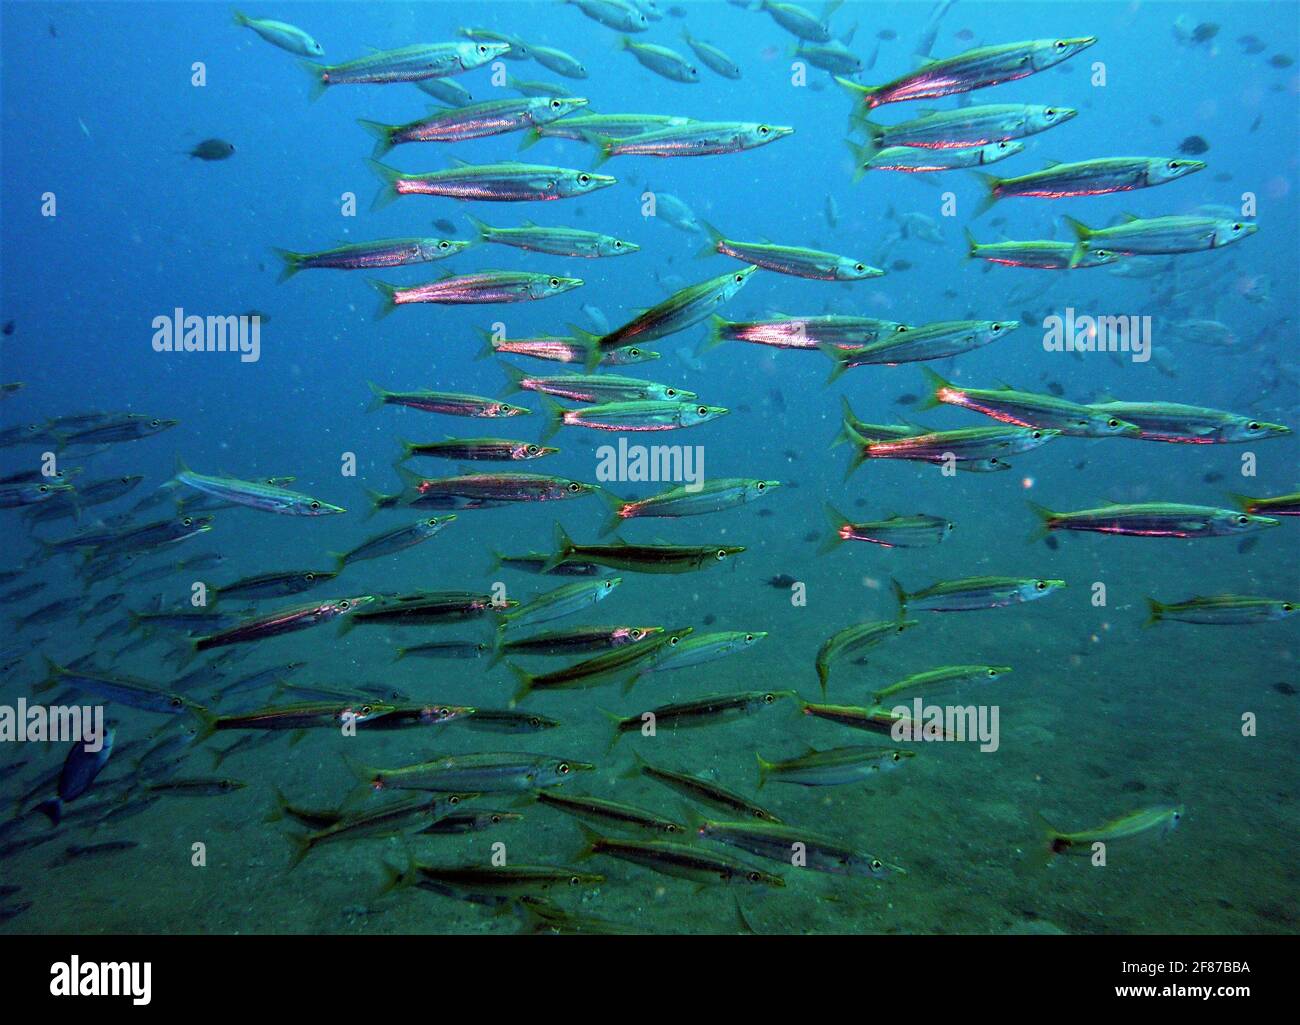 A school of fish at the coral reef in the Similan Islands, Thailand. Stock Photo